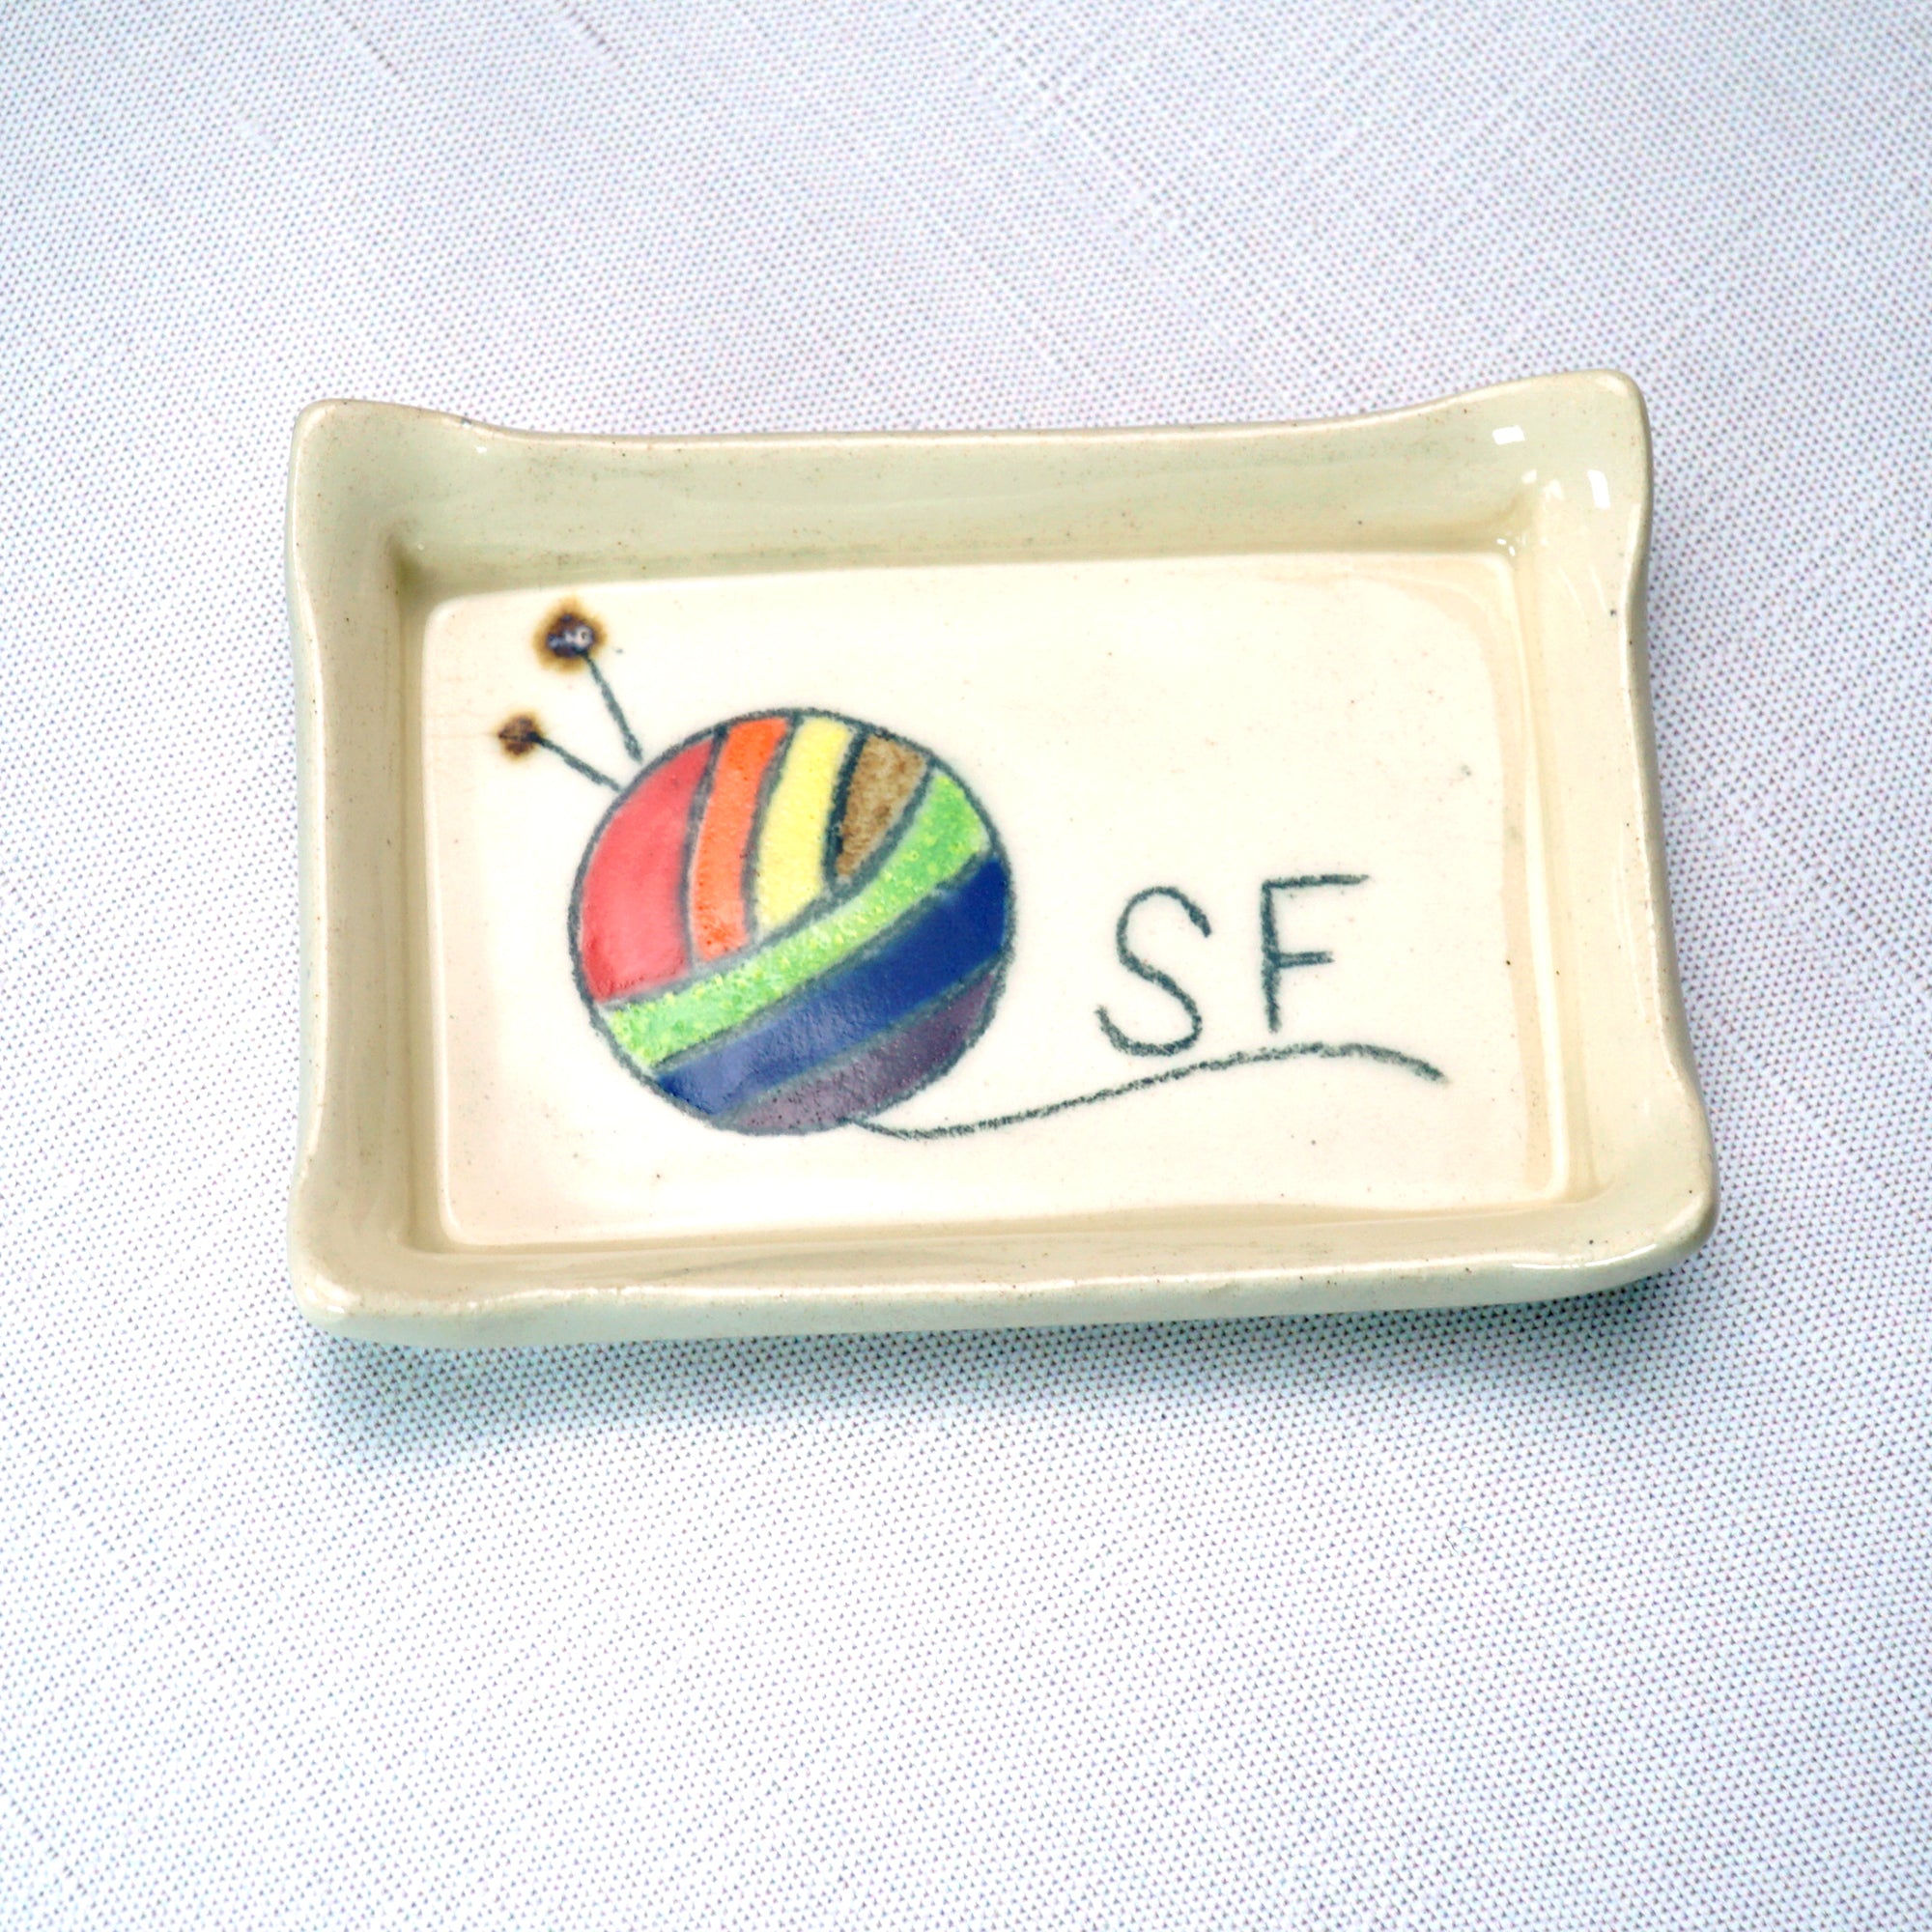 Curious Potter SF Small Trinket Tray Ring Rectangular Dish